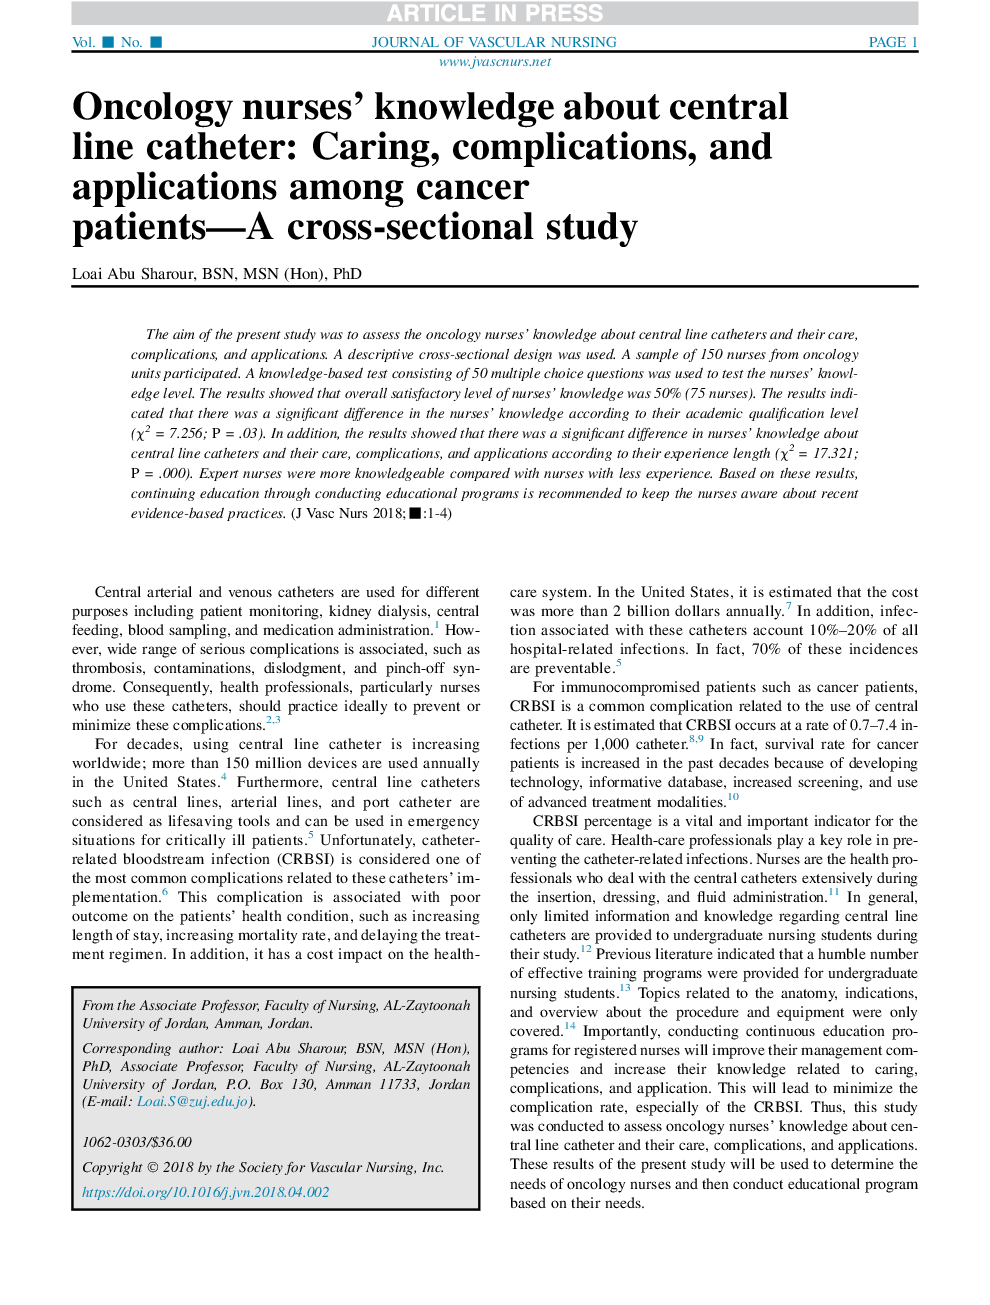 Oncology nurses' knowledge about central line catheter: Caring, complications, and applications among cancer patients-A cross-sectional study